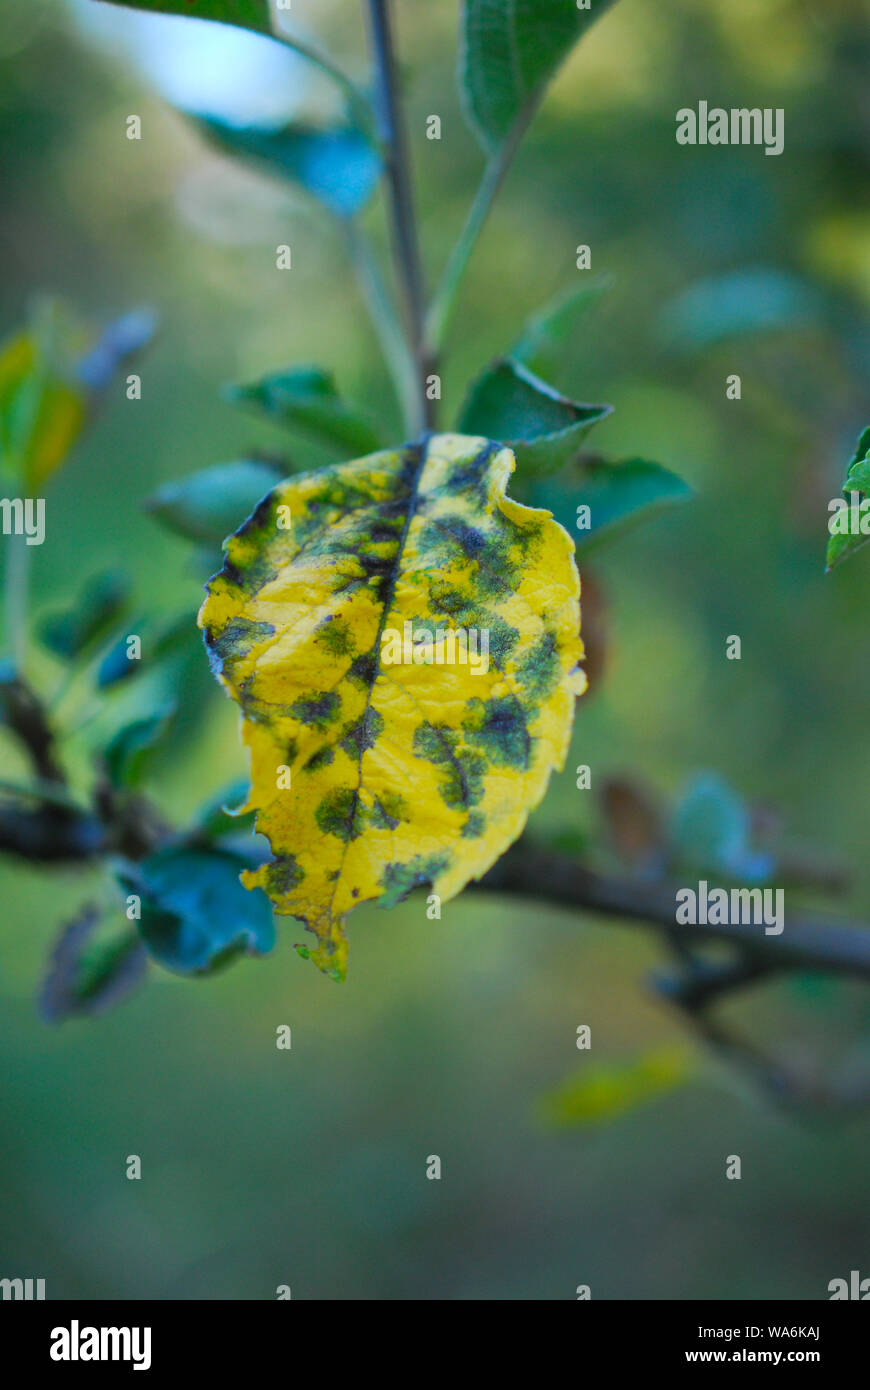 decease on an apple leaf in august Stock Photo